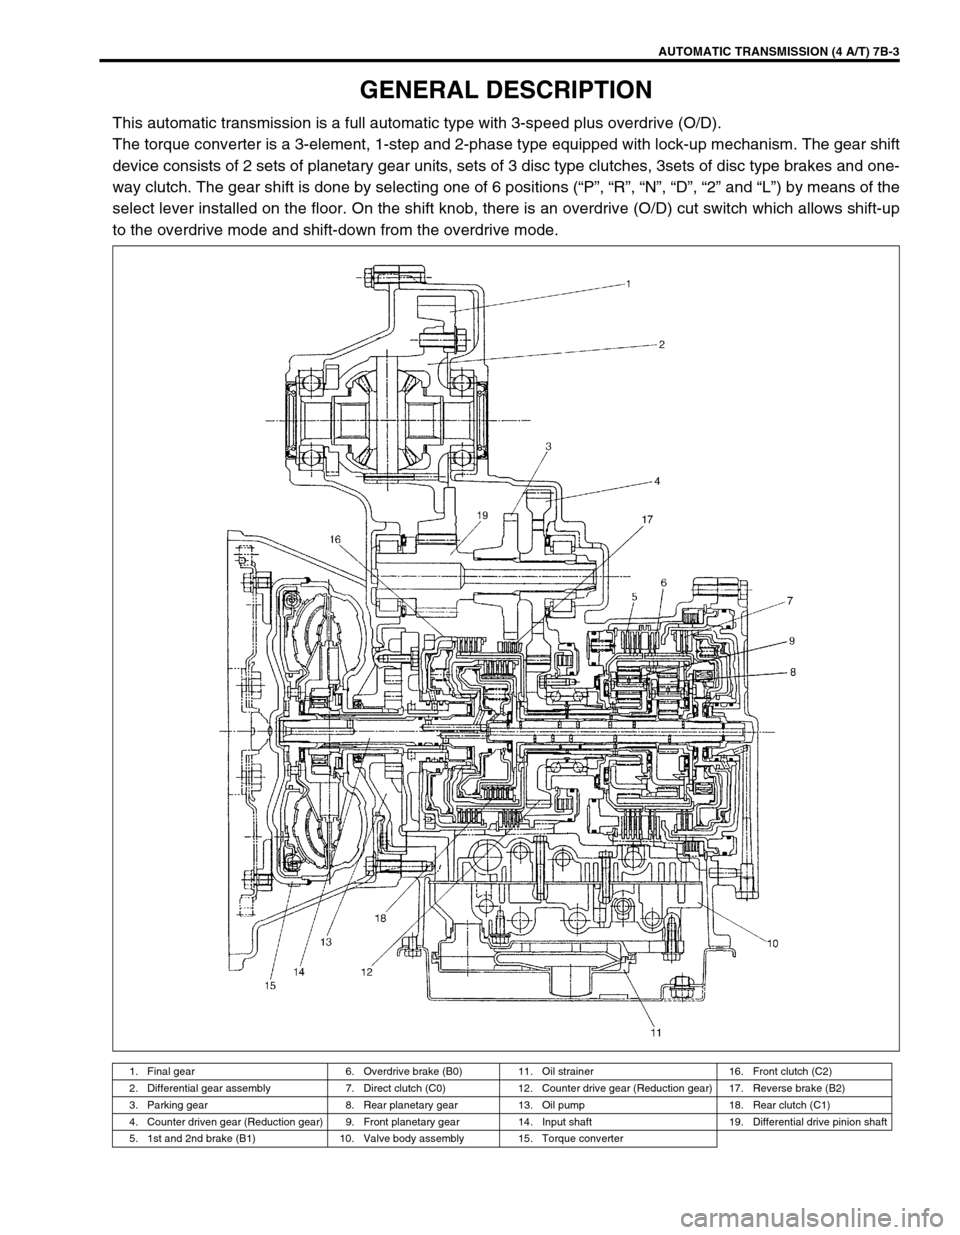 SUZUKI SWIFT 2000 1.G Transmission Service Workshop Manual AUTOMATIC TRANSMISSION (4 A/T) 7B-3
GENERAL DESCRIPTION
This automatic transmission is a full automatic type with 3-speed plus overdrive (O/D).
The torque converter is a 3-element, 1-step and 2-phase 